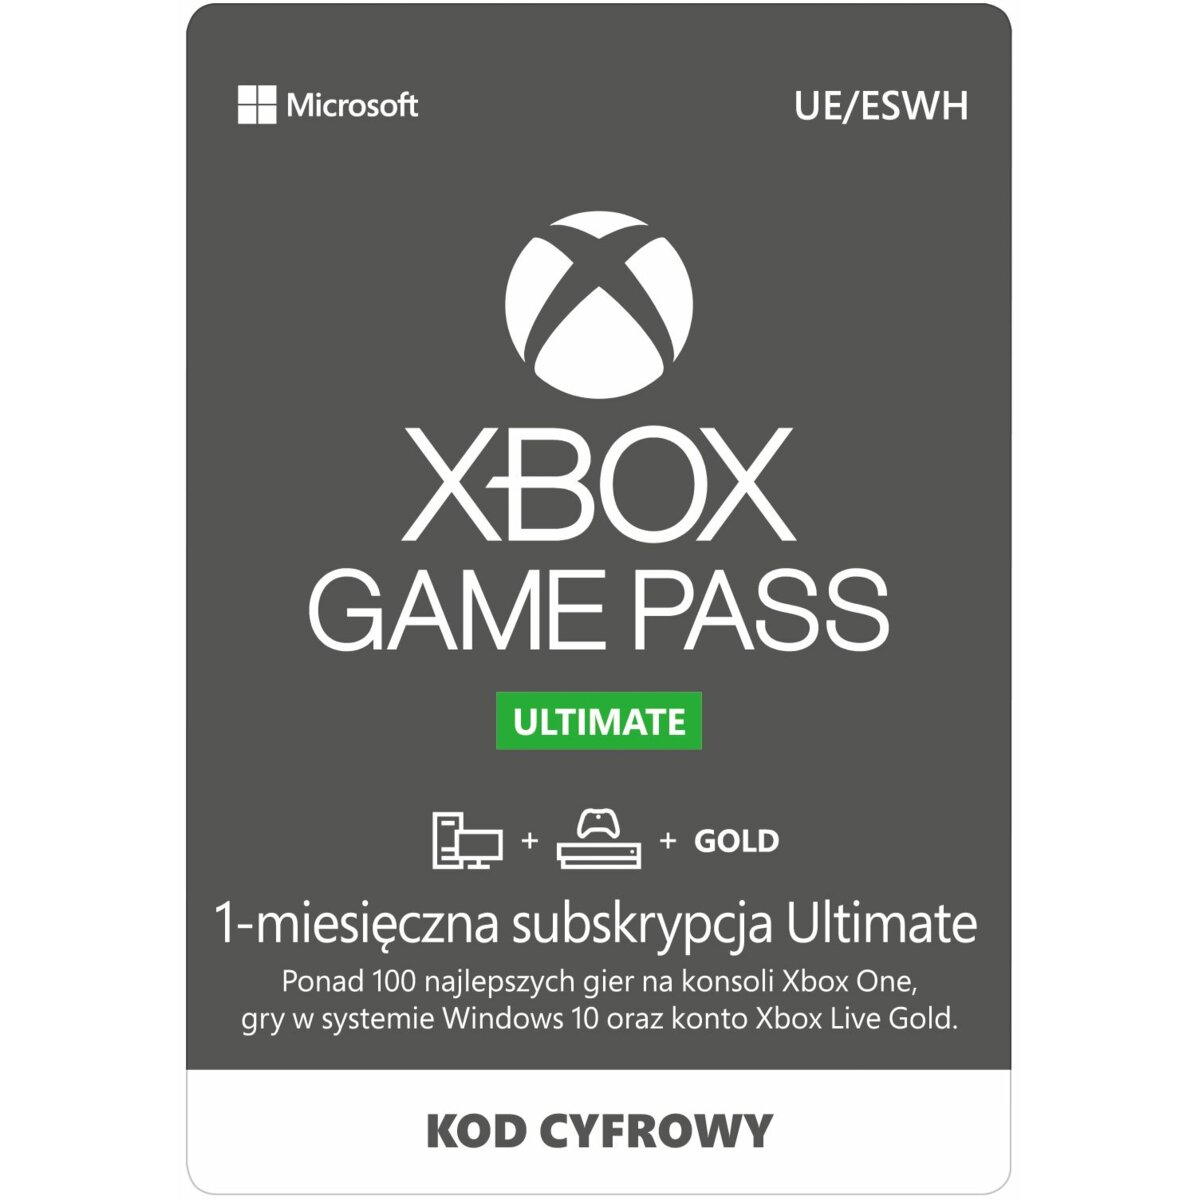 how much is a year of game pass